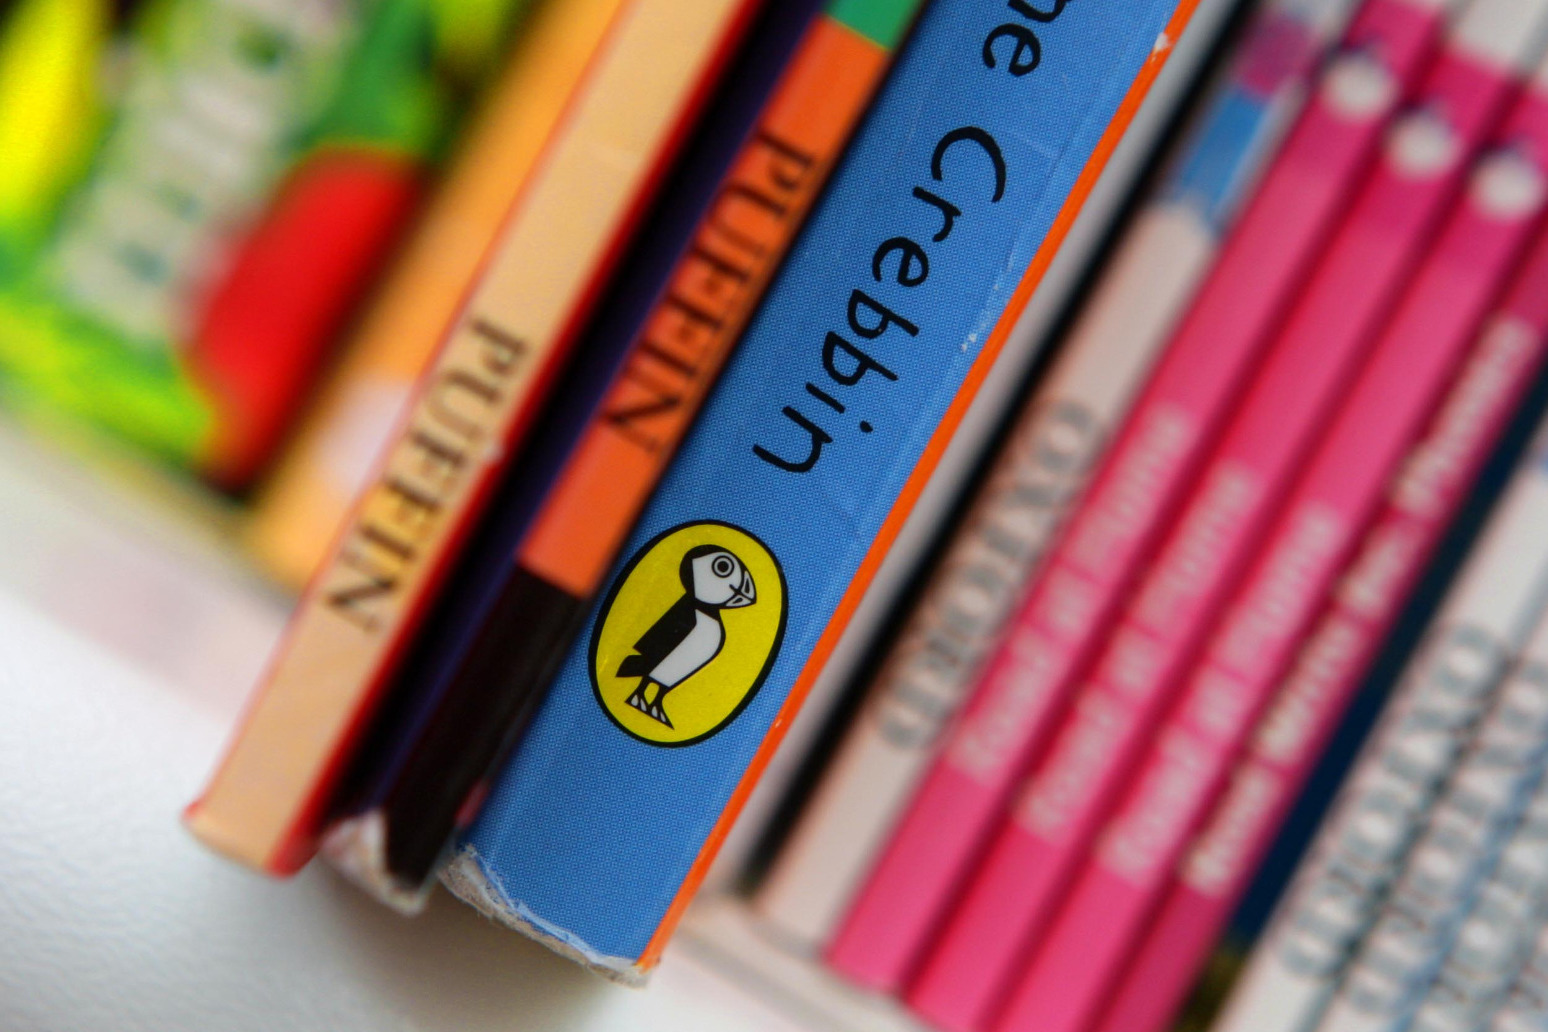 Online bookshop hits £3 million for independent sellers 